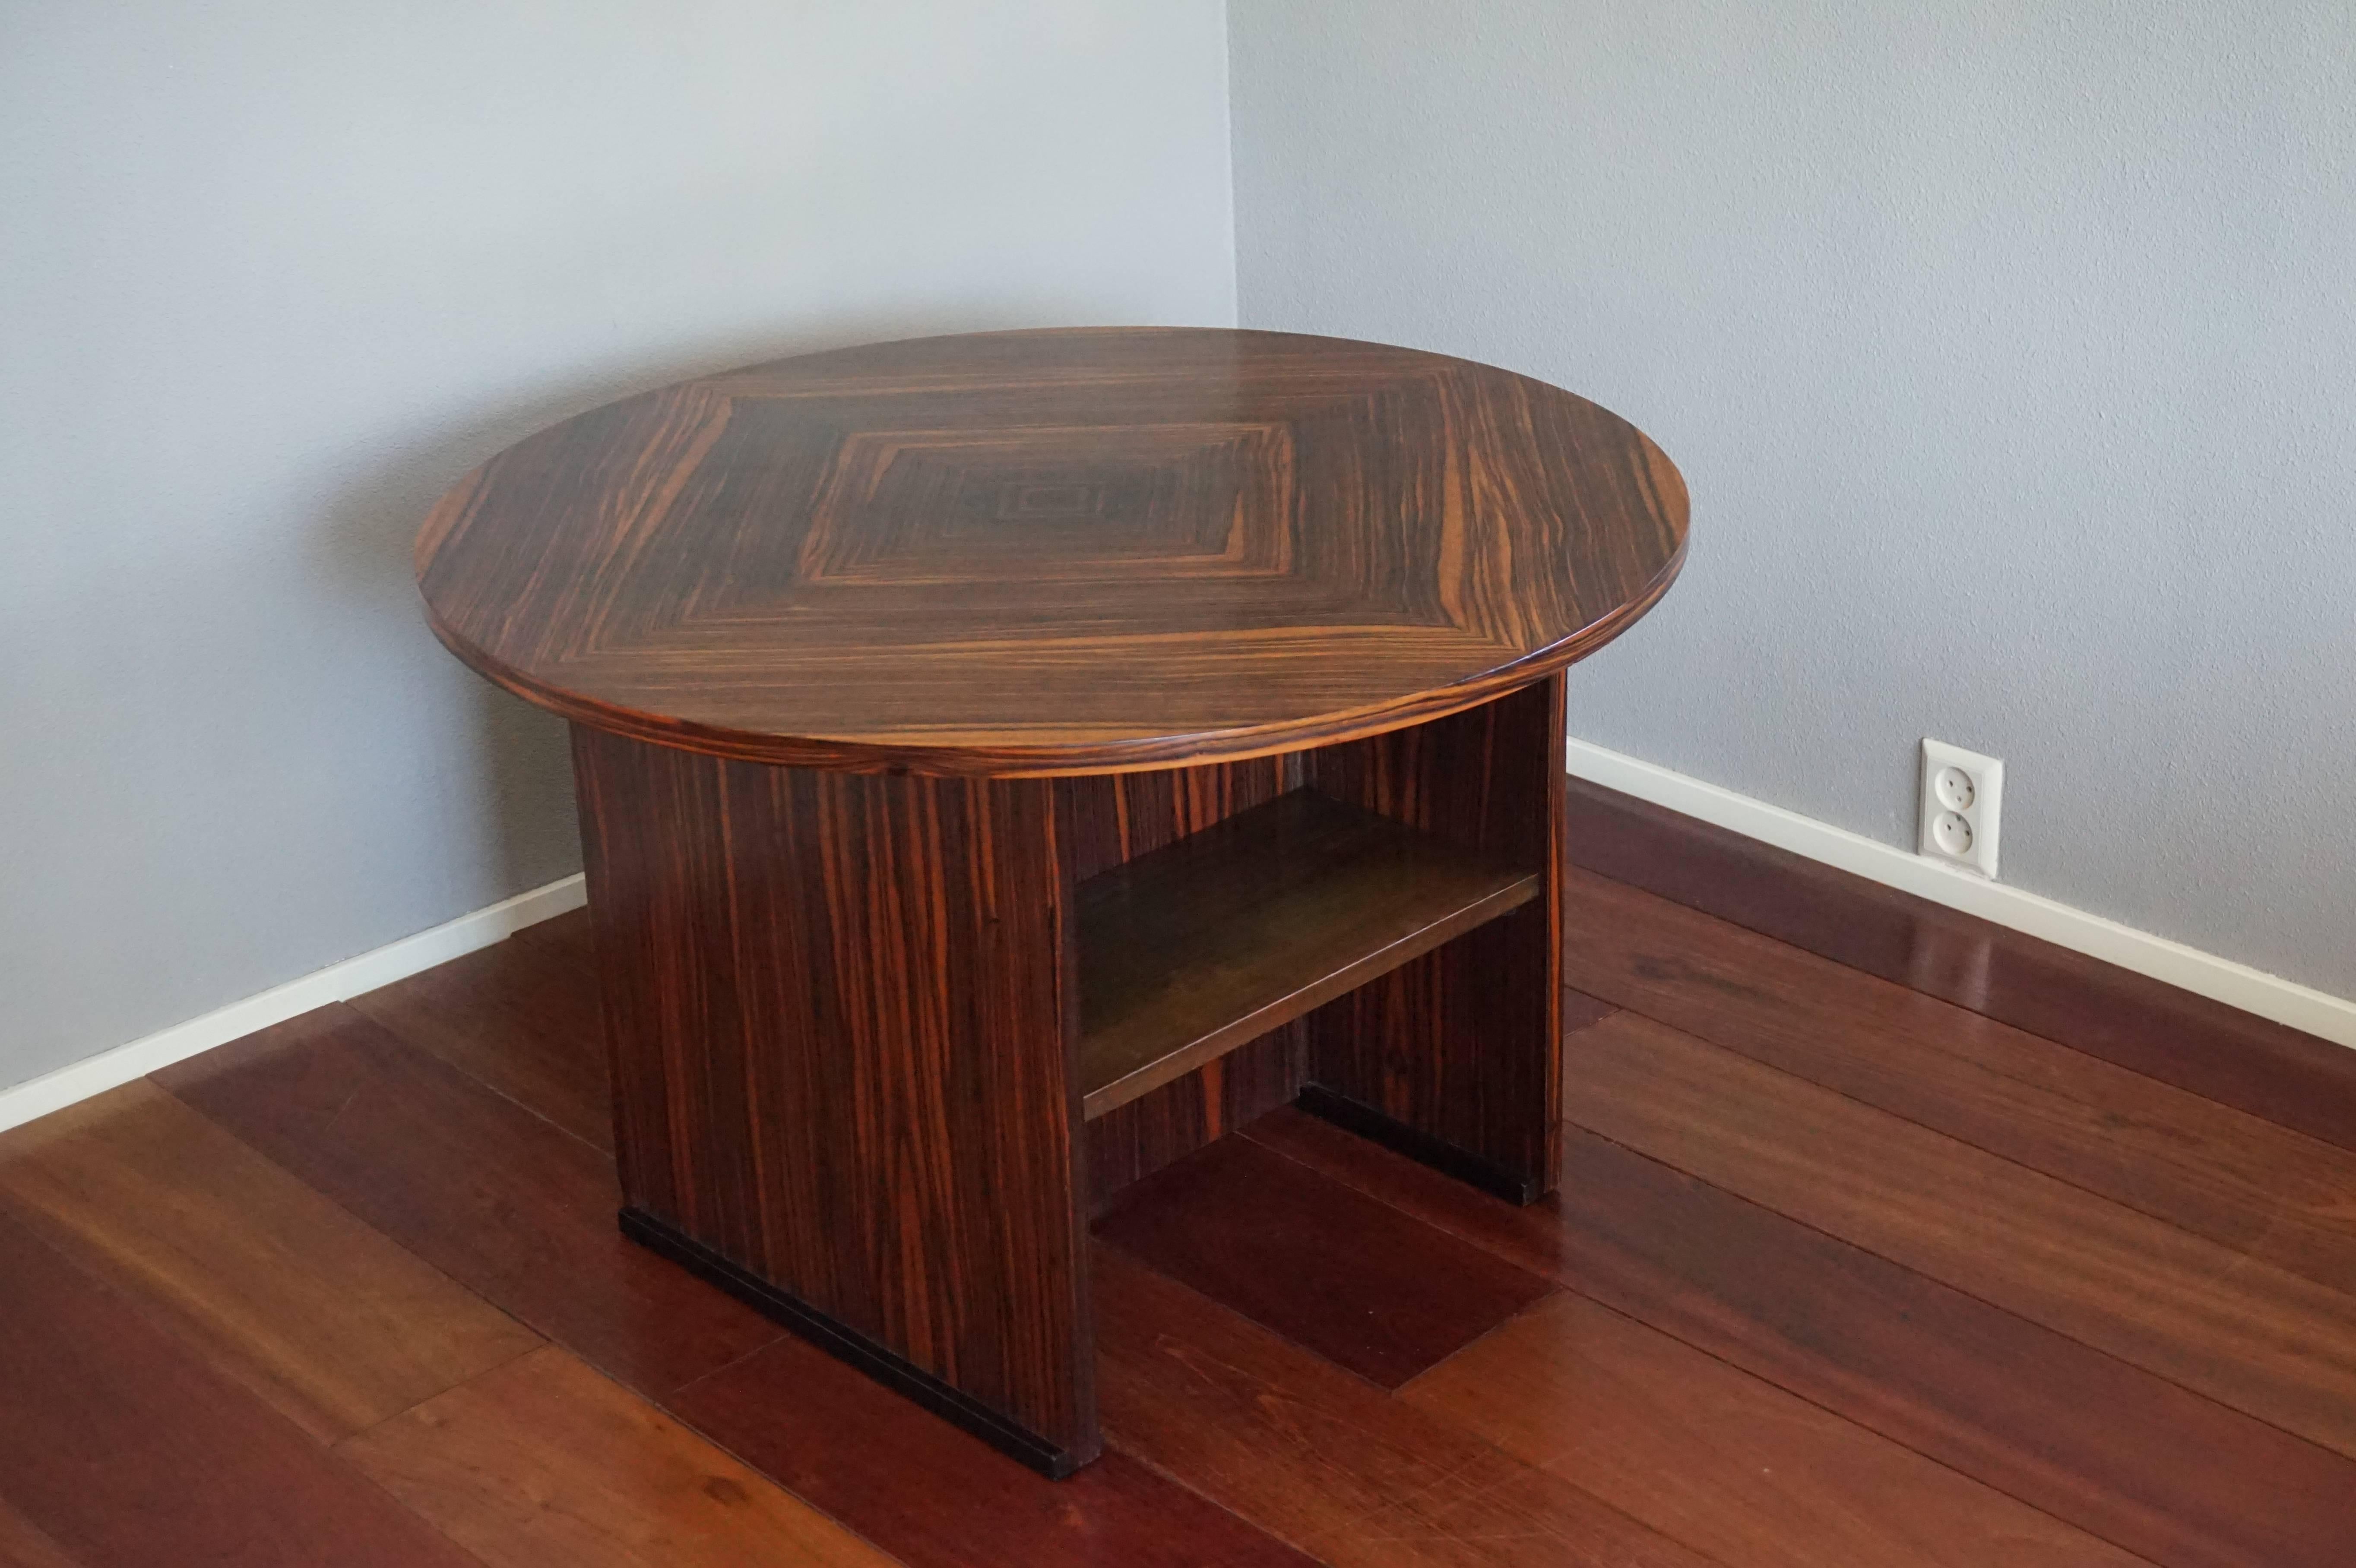 Unique and good size Art Deco table by one of Holland's finest.

This stunning 1920's Art Deco coffee table by Pander of the Hague is in excellent condition. We bought it from the period house in The Hague where it had been since the first owner had